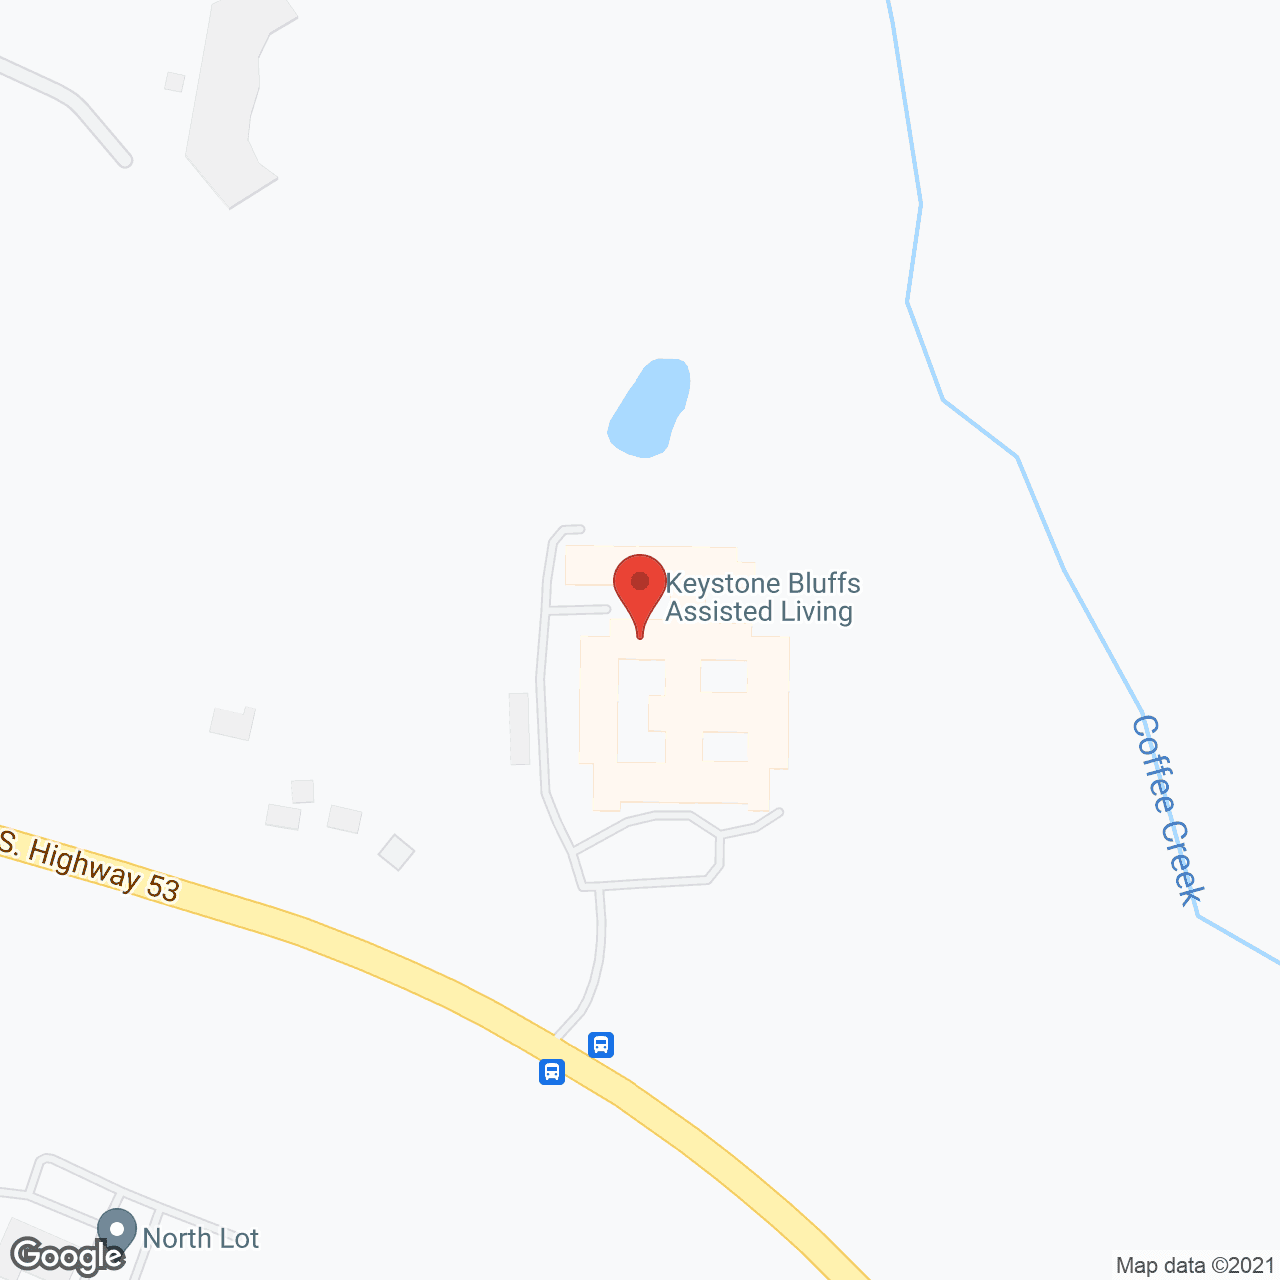 Keystone Bluffs Assisted Living in google map